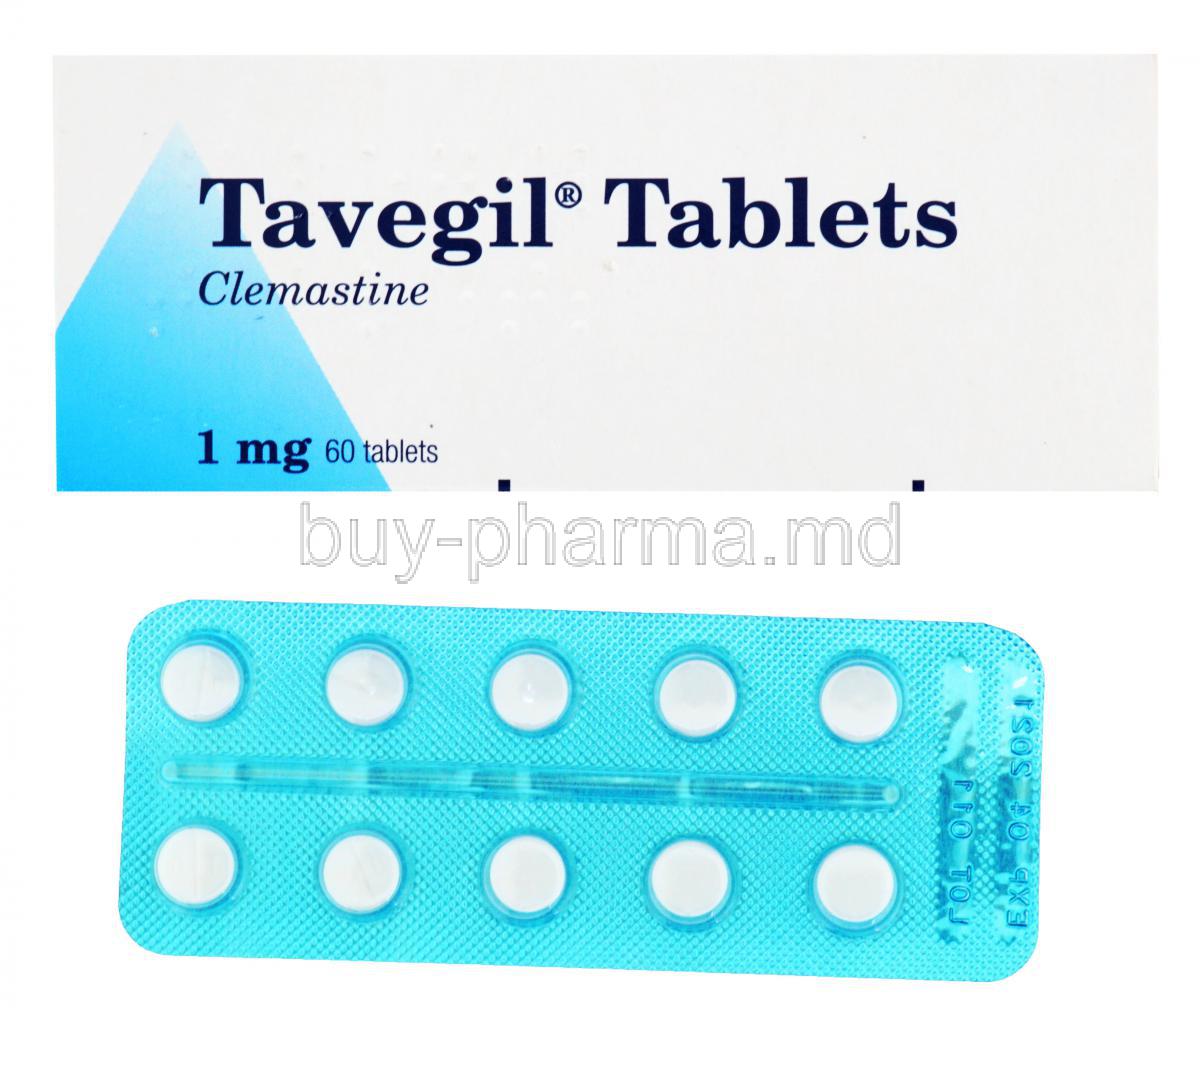 Tavegil, Clemastine, 1mg 60 tabs, Box and blister pack front presentation